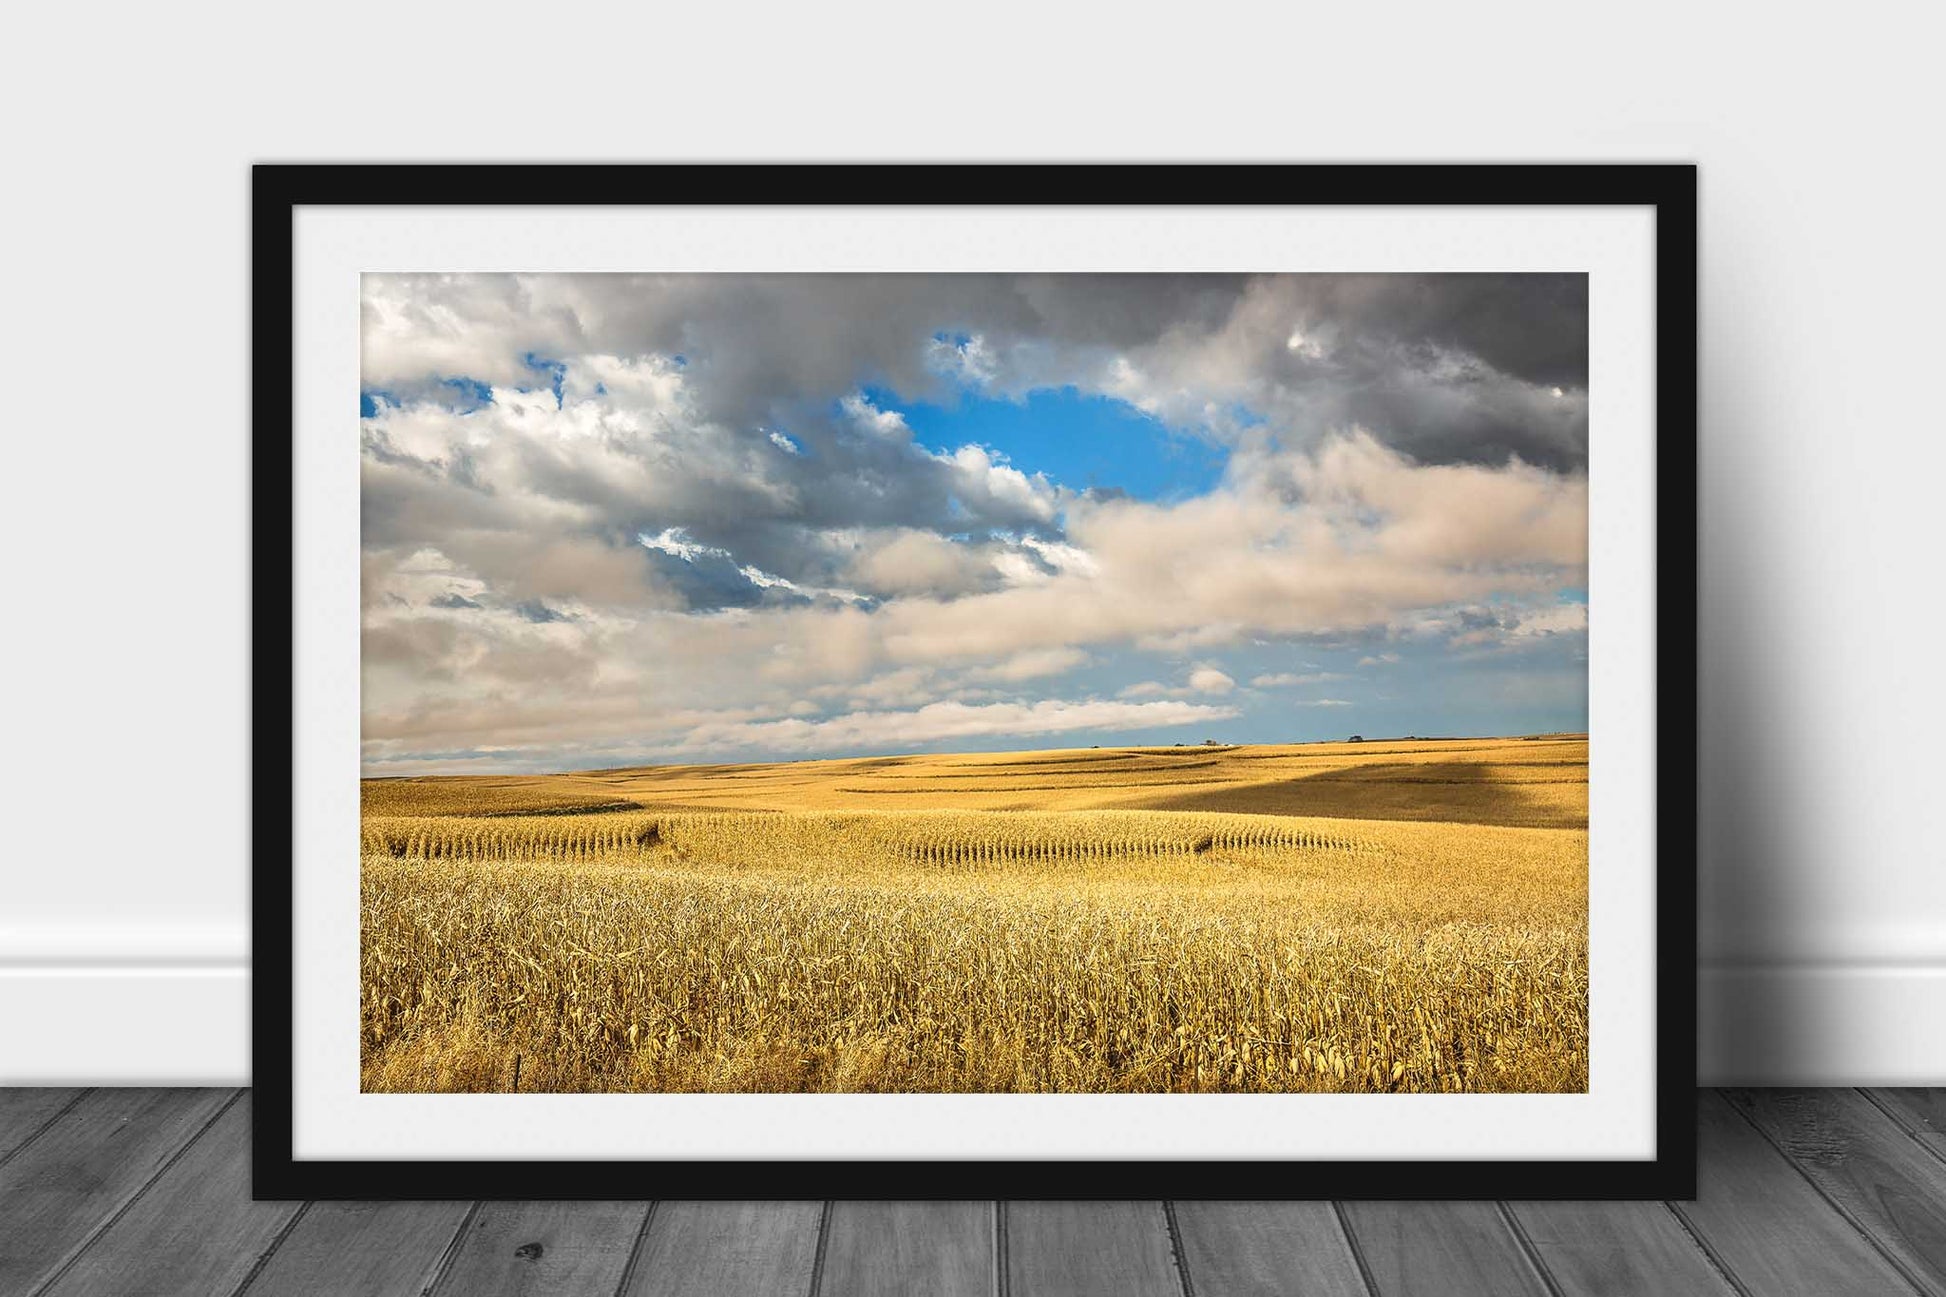 Framed and matted midwestern print of golden terraced corn fields under a fair sky on an autumn day in Iowa by Sean Ramsey of Southern Plains Photography.